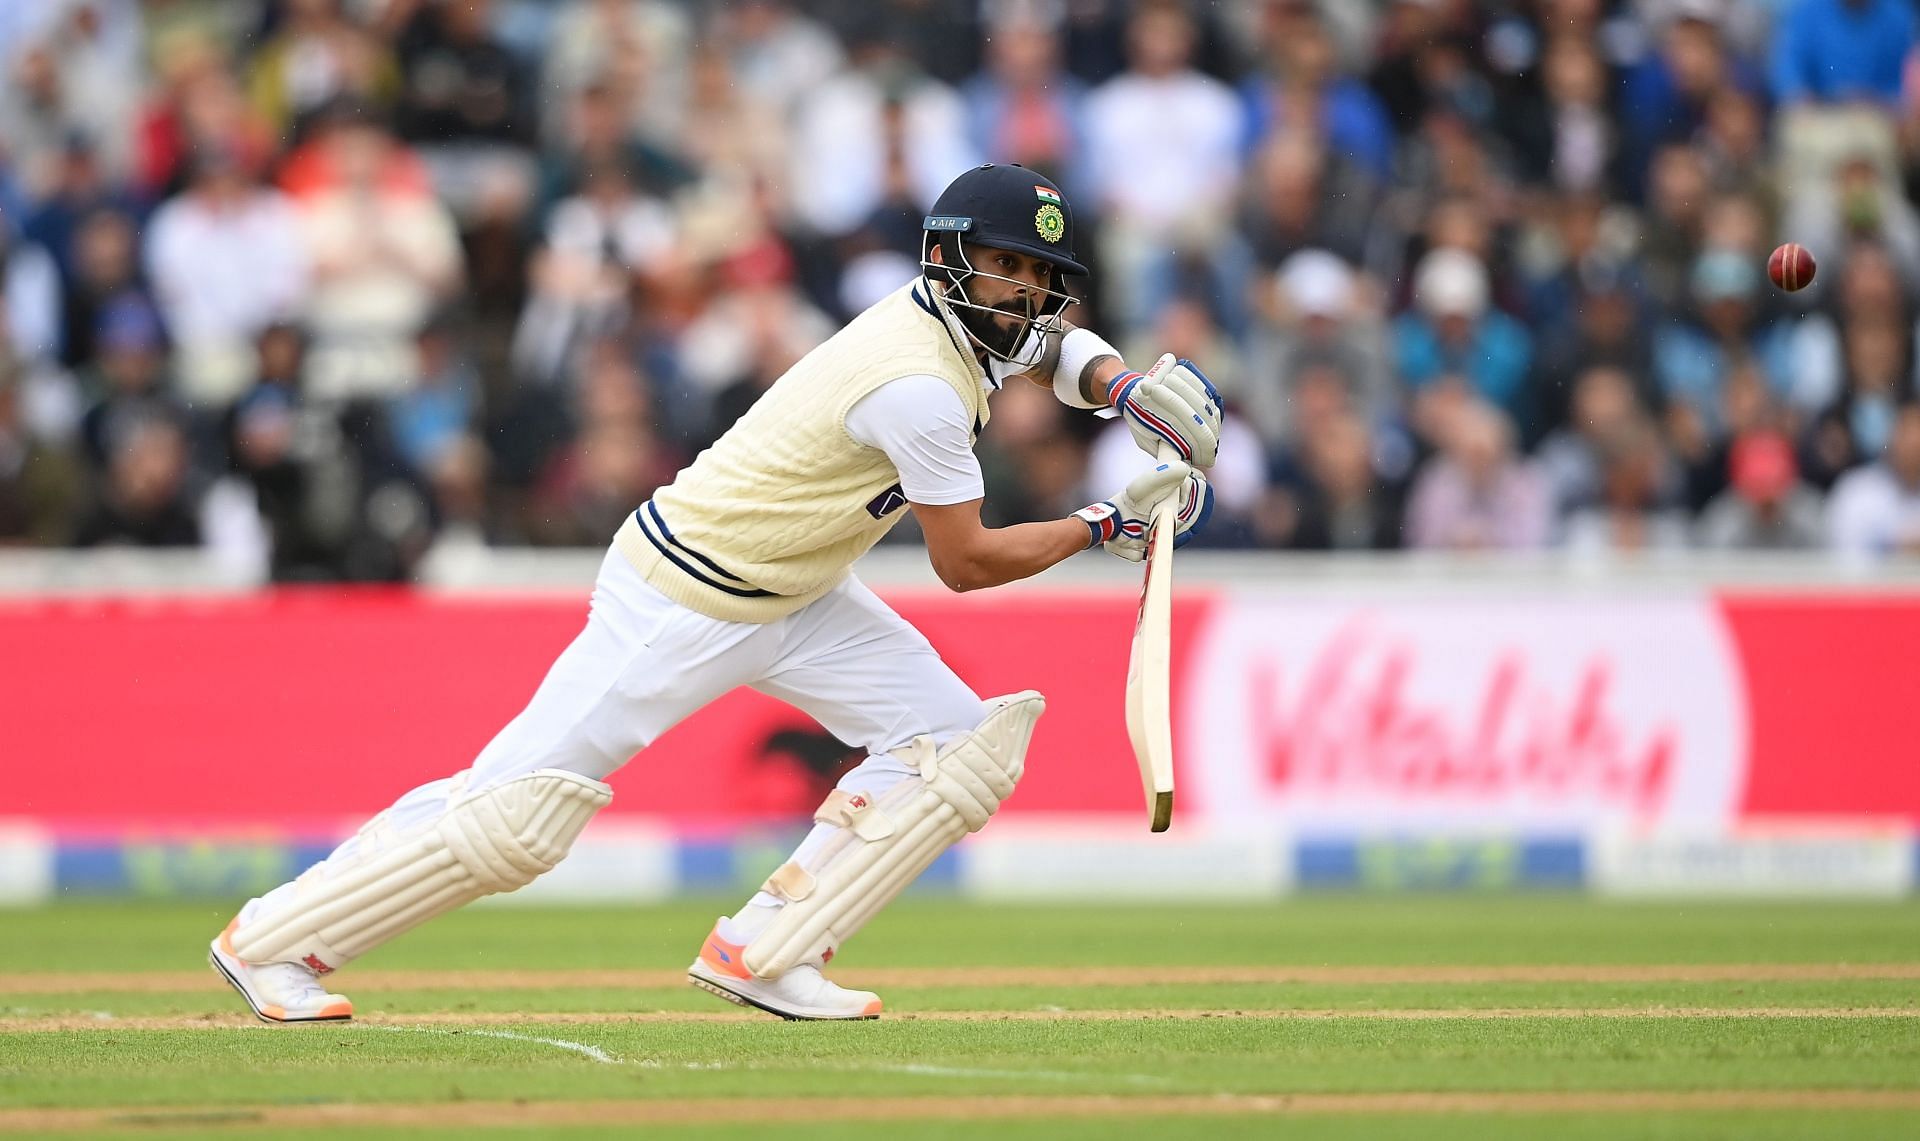 Virat Kohli looked in decent touch before he was dismissed